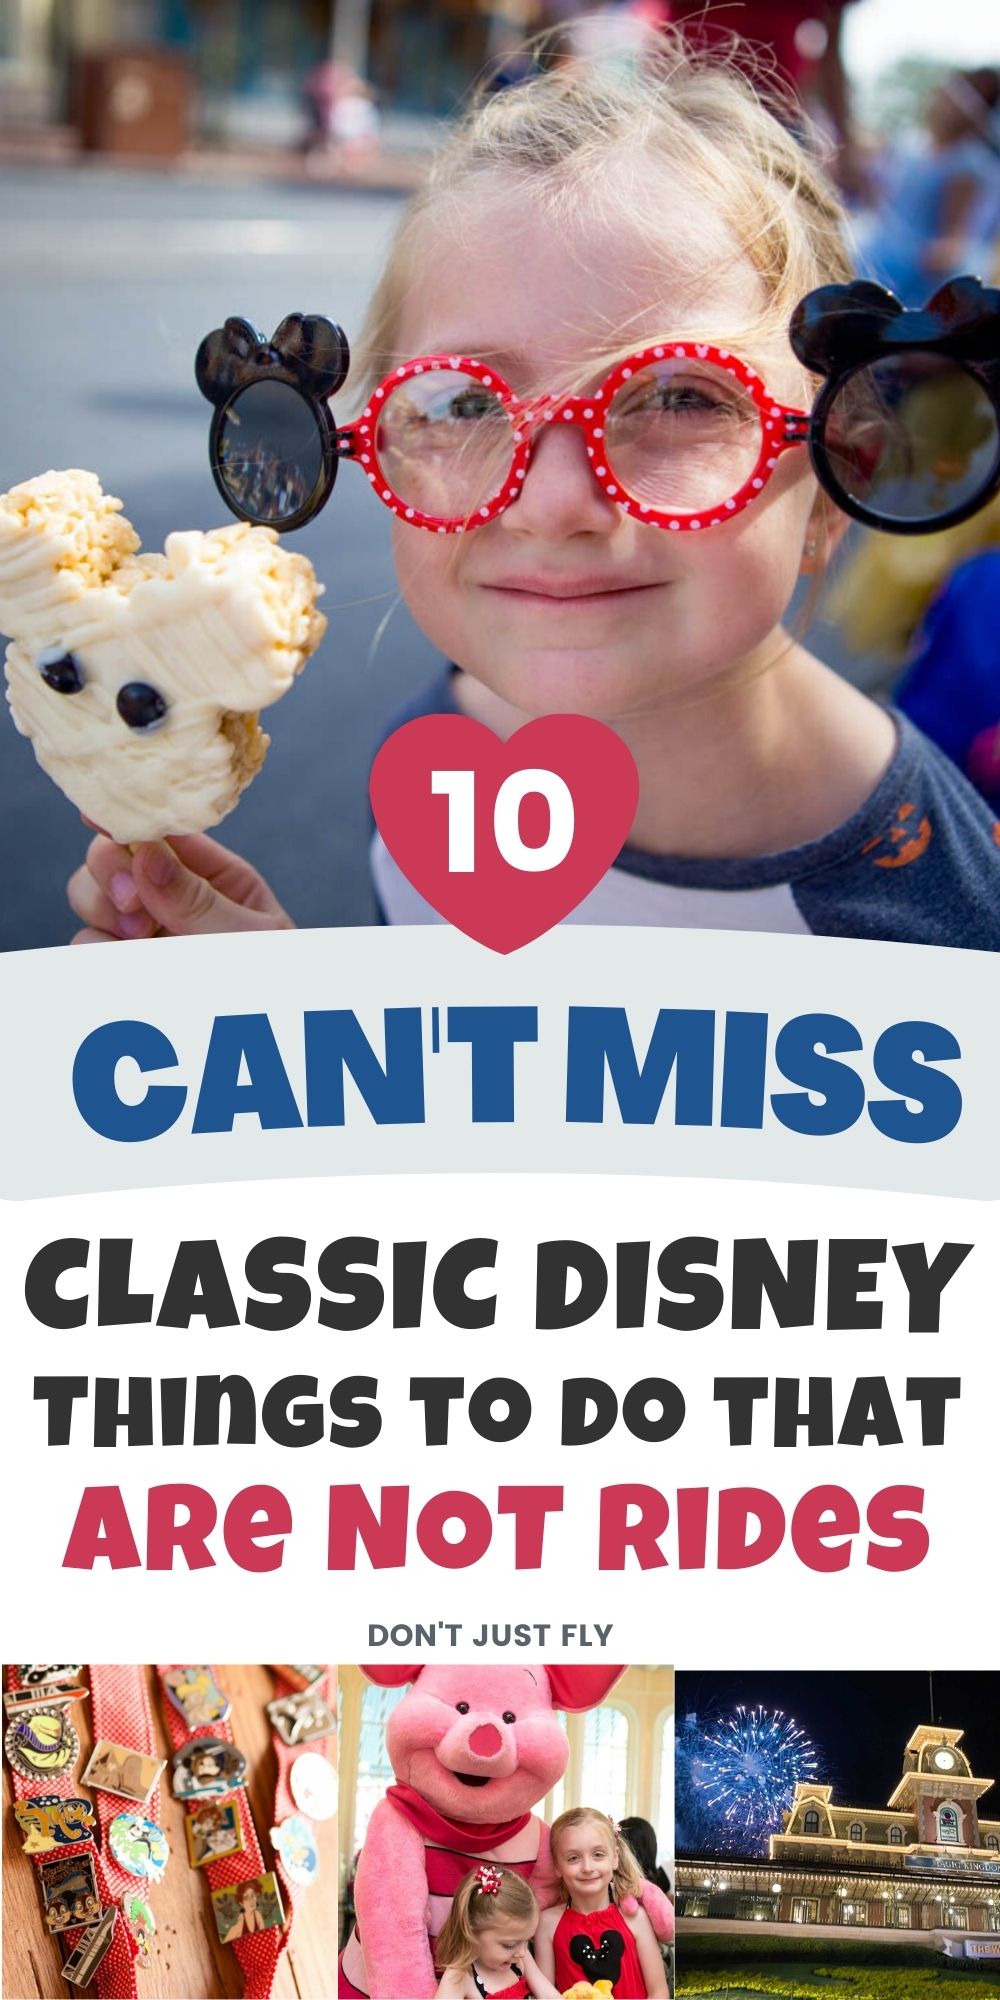 A photo collage shows several fun things to do at Disney that are not rides.